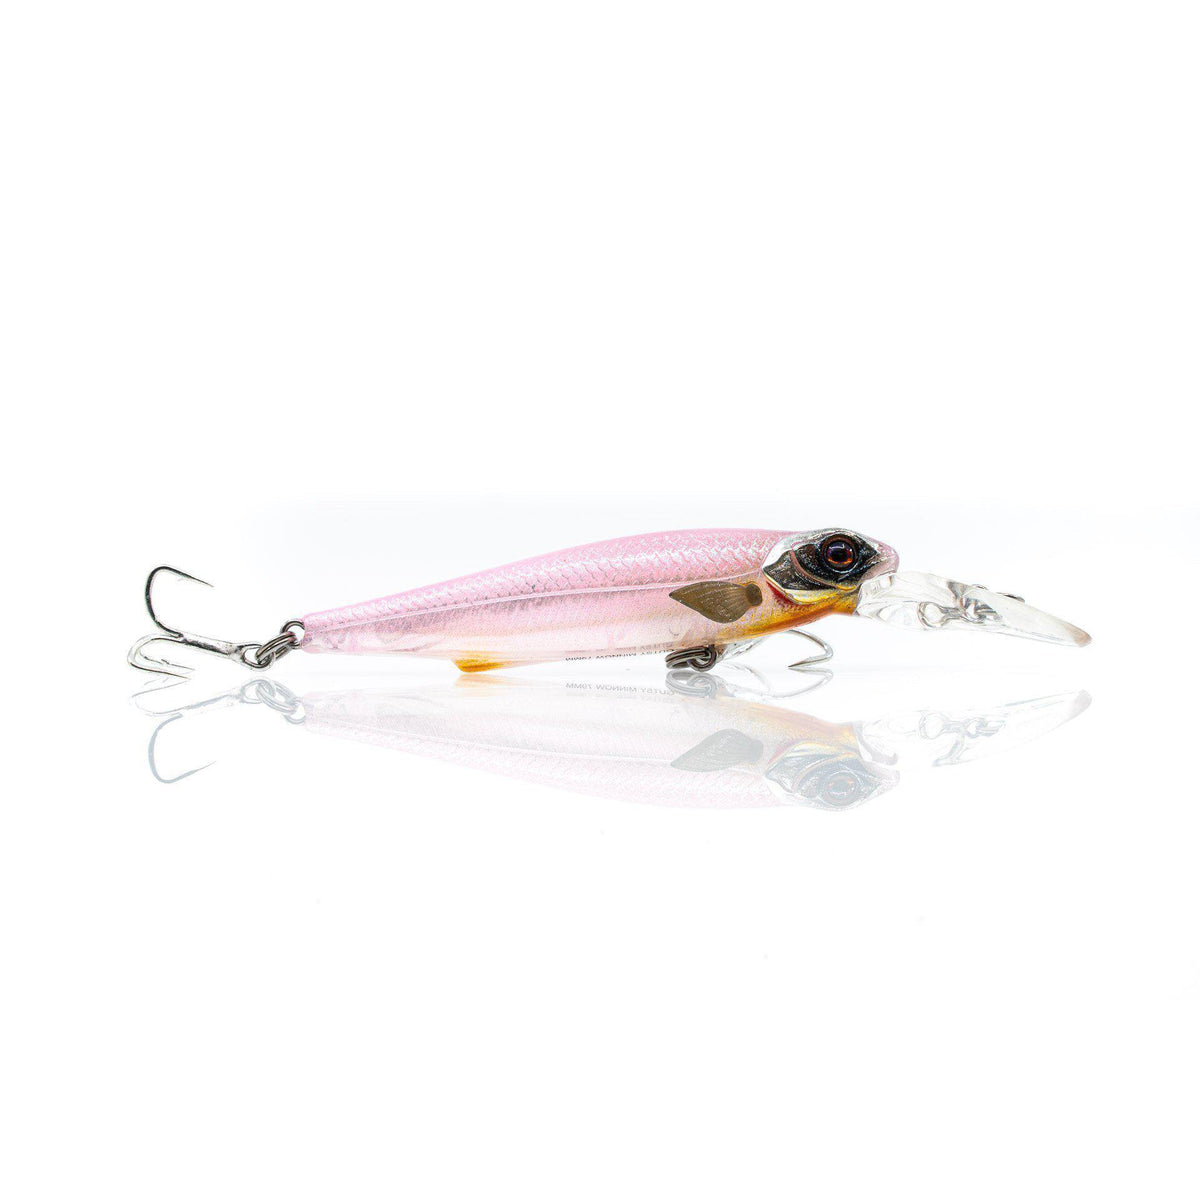 Fishing Lures for Sale - #1 for fishing lures in Australia Page 20 - Addict  Tackle